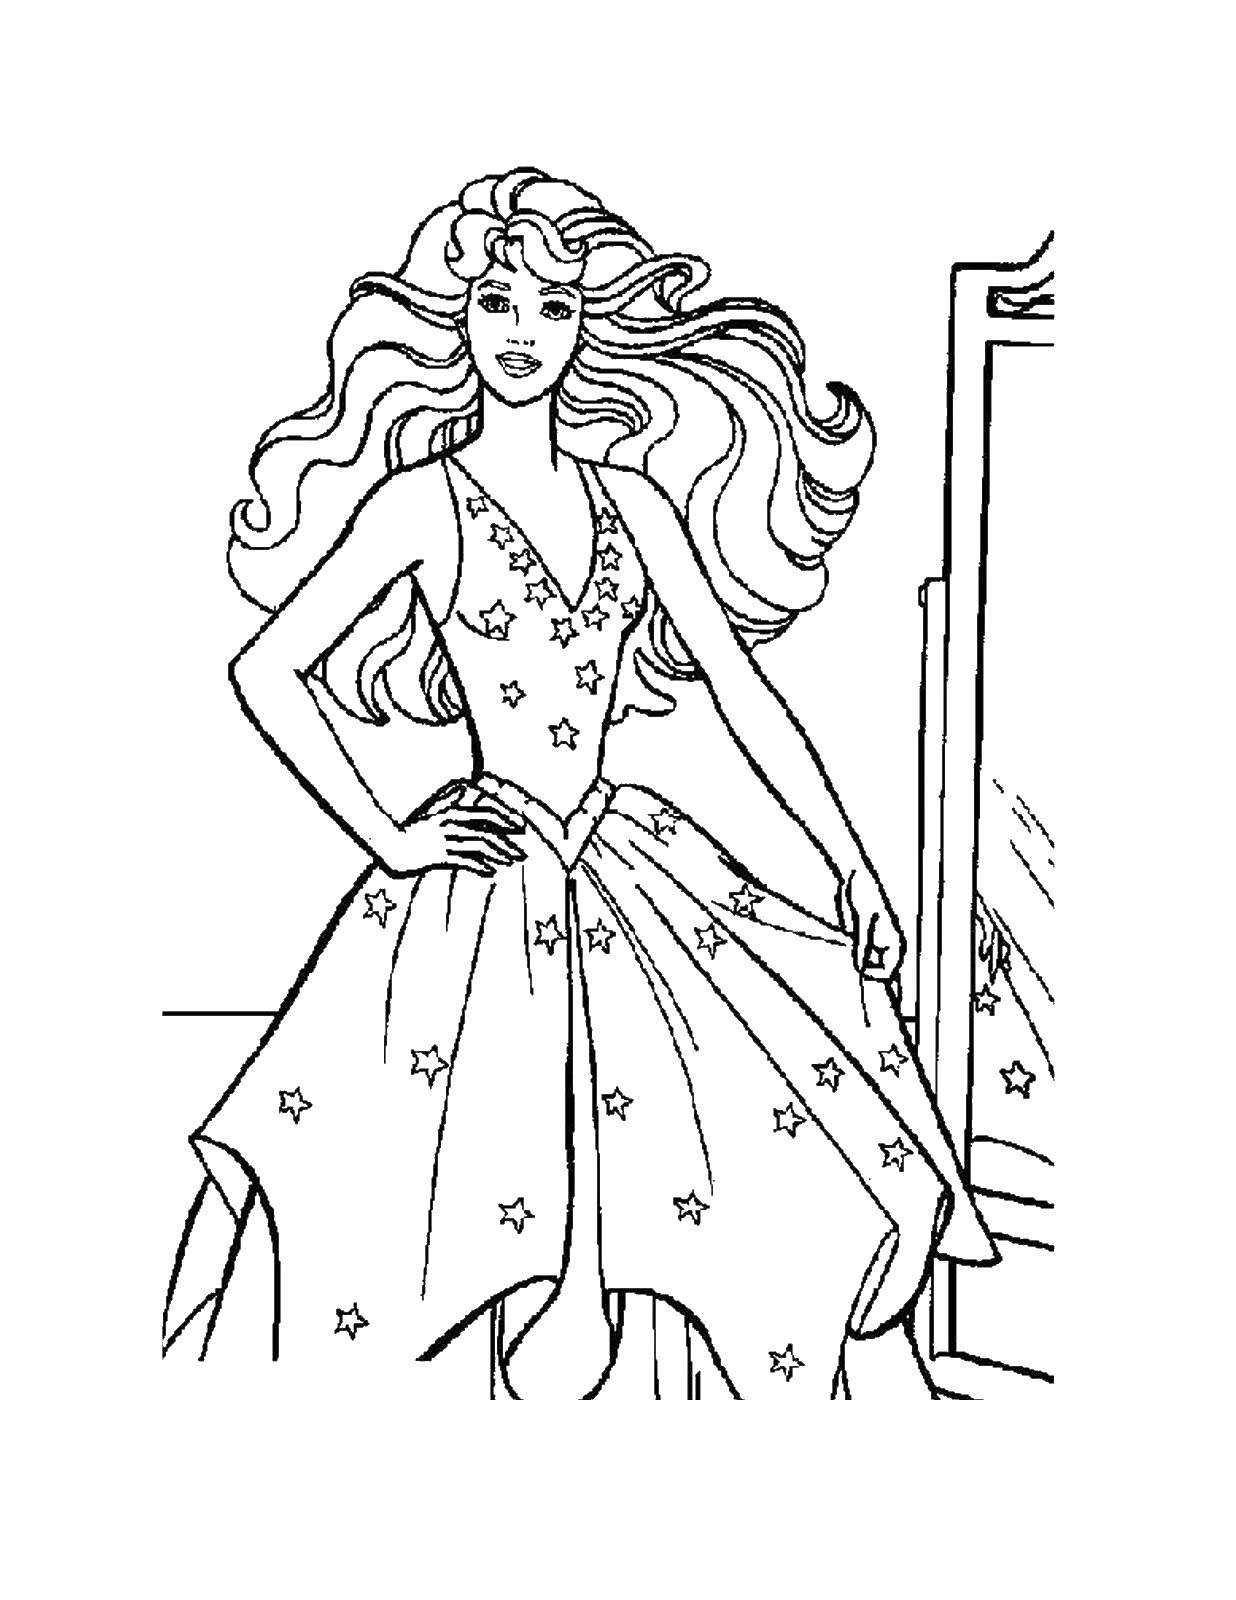 Coloring Barbie in a dress with stars. Category Dress. Tags:  Clothing, dress.